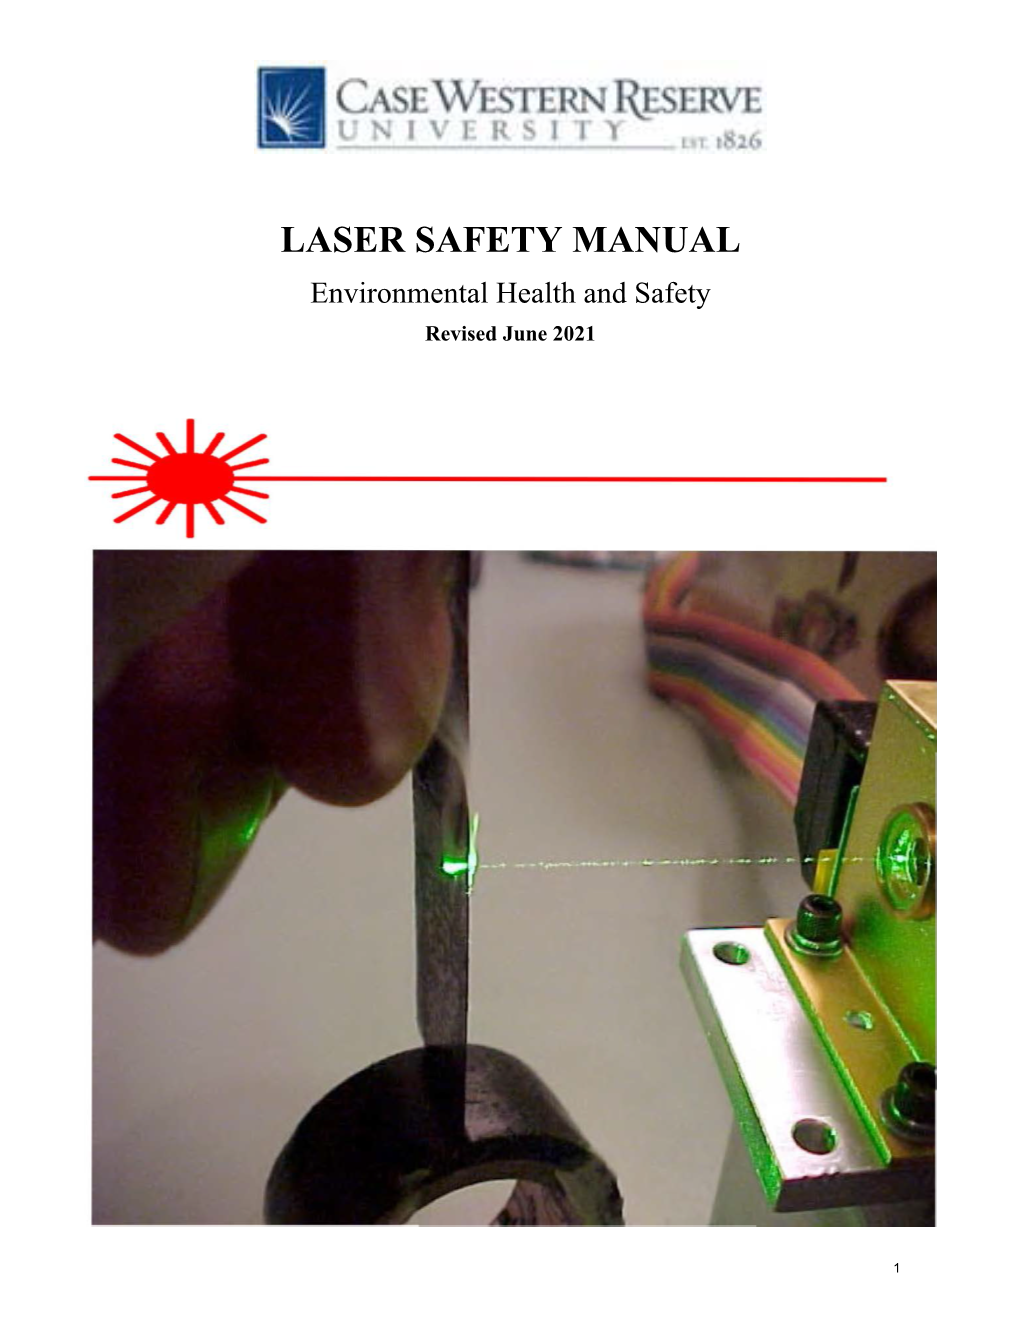 LASER SAFETY MANUAL Environmental Health and Safety Revised June 2021